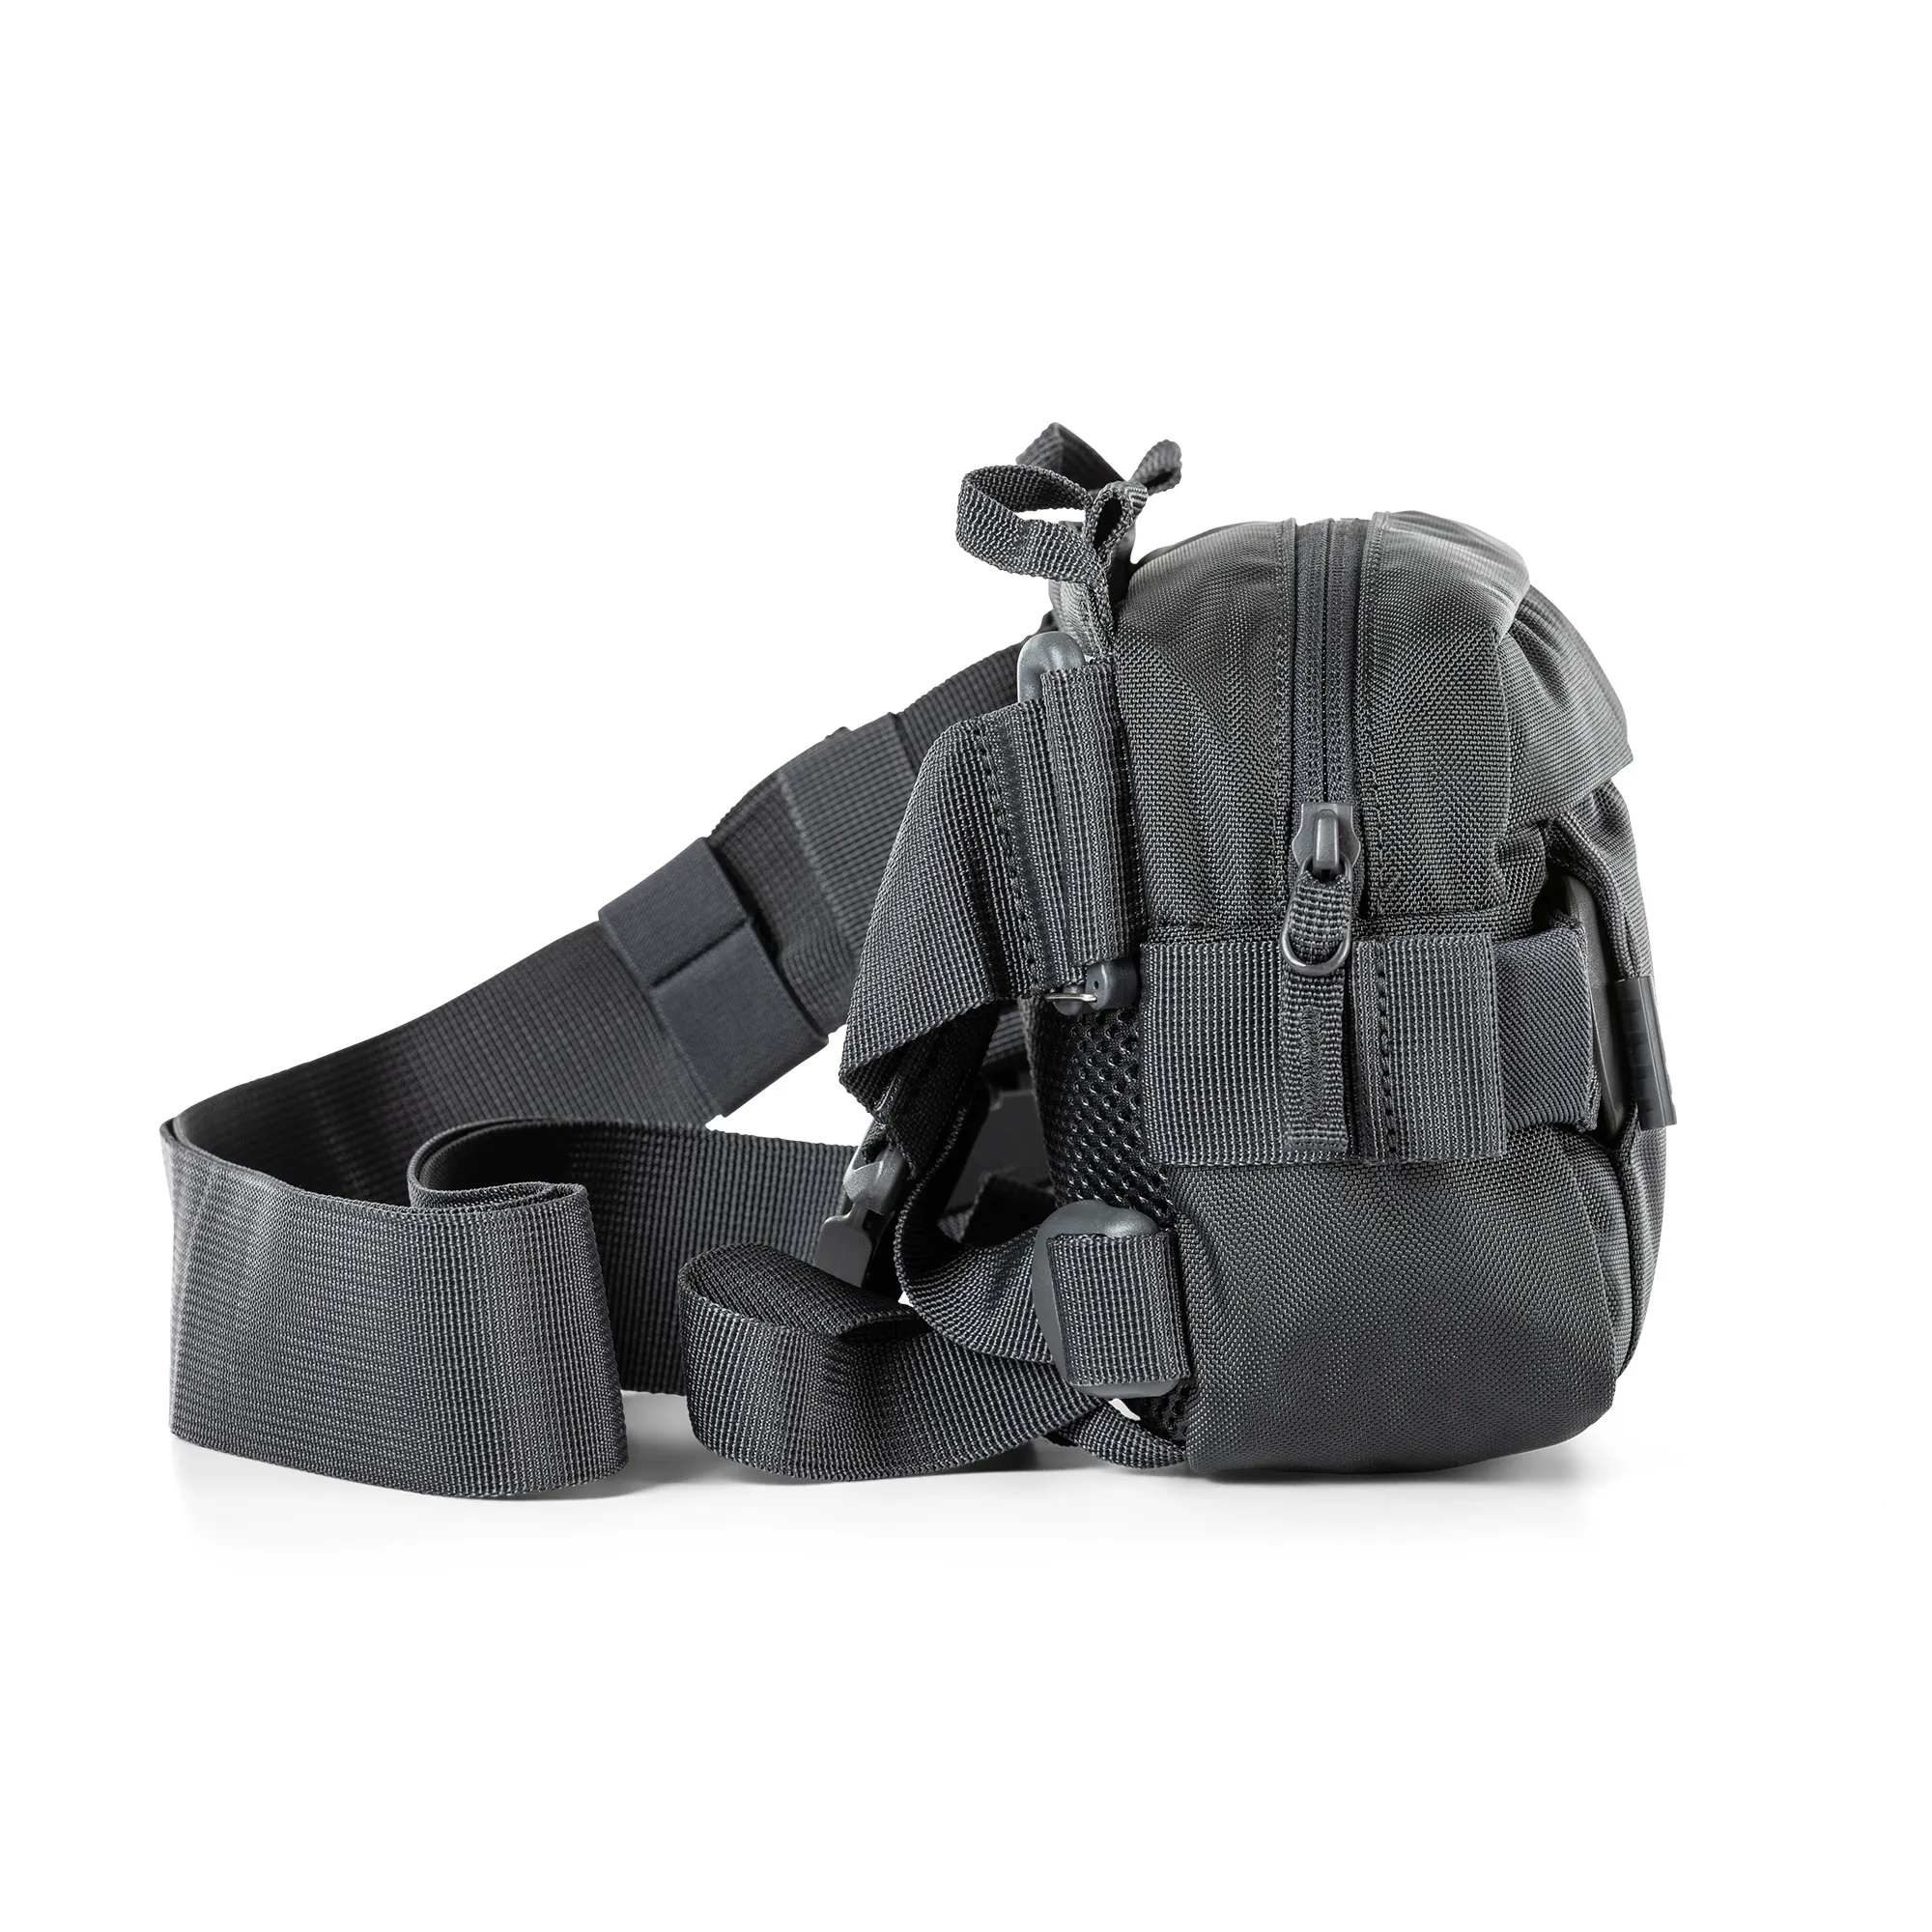 Buy 5.11 Tactical LV10 2.0 Sling Pack, Python - 56701-256. Price